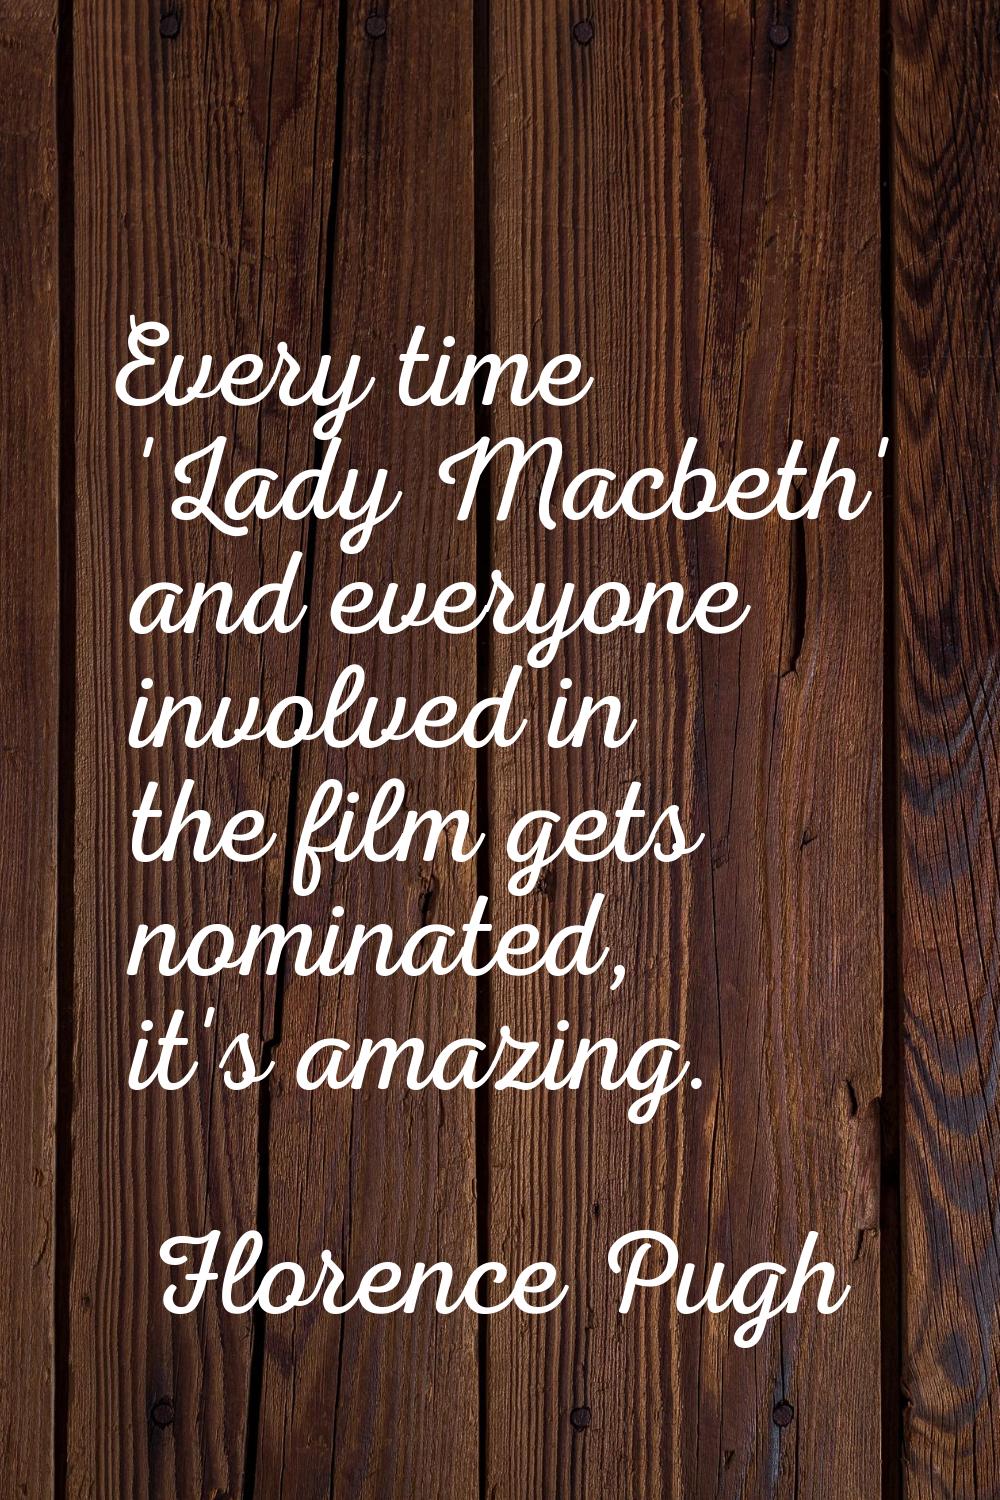 Every time 'Lady Macbeth' and everyone involved in the film gets nominated, it's amazing.